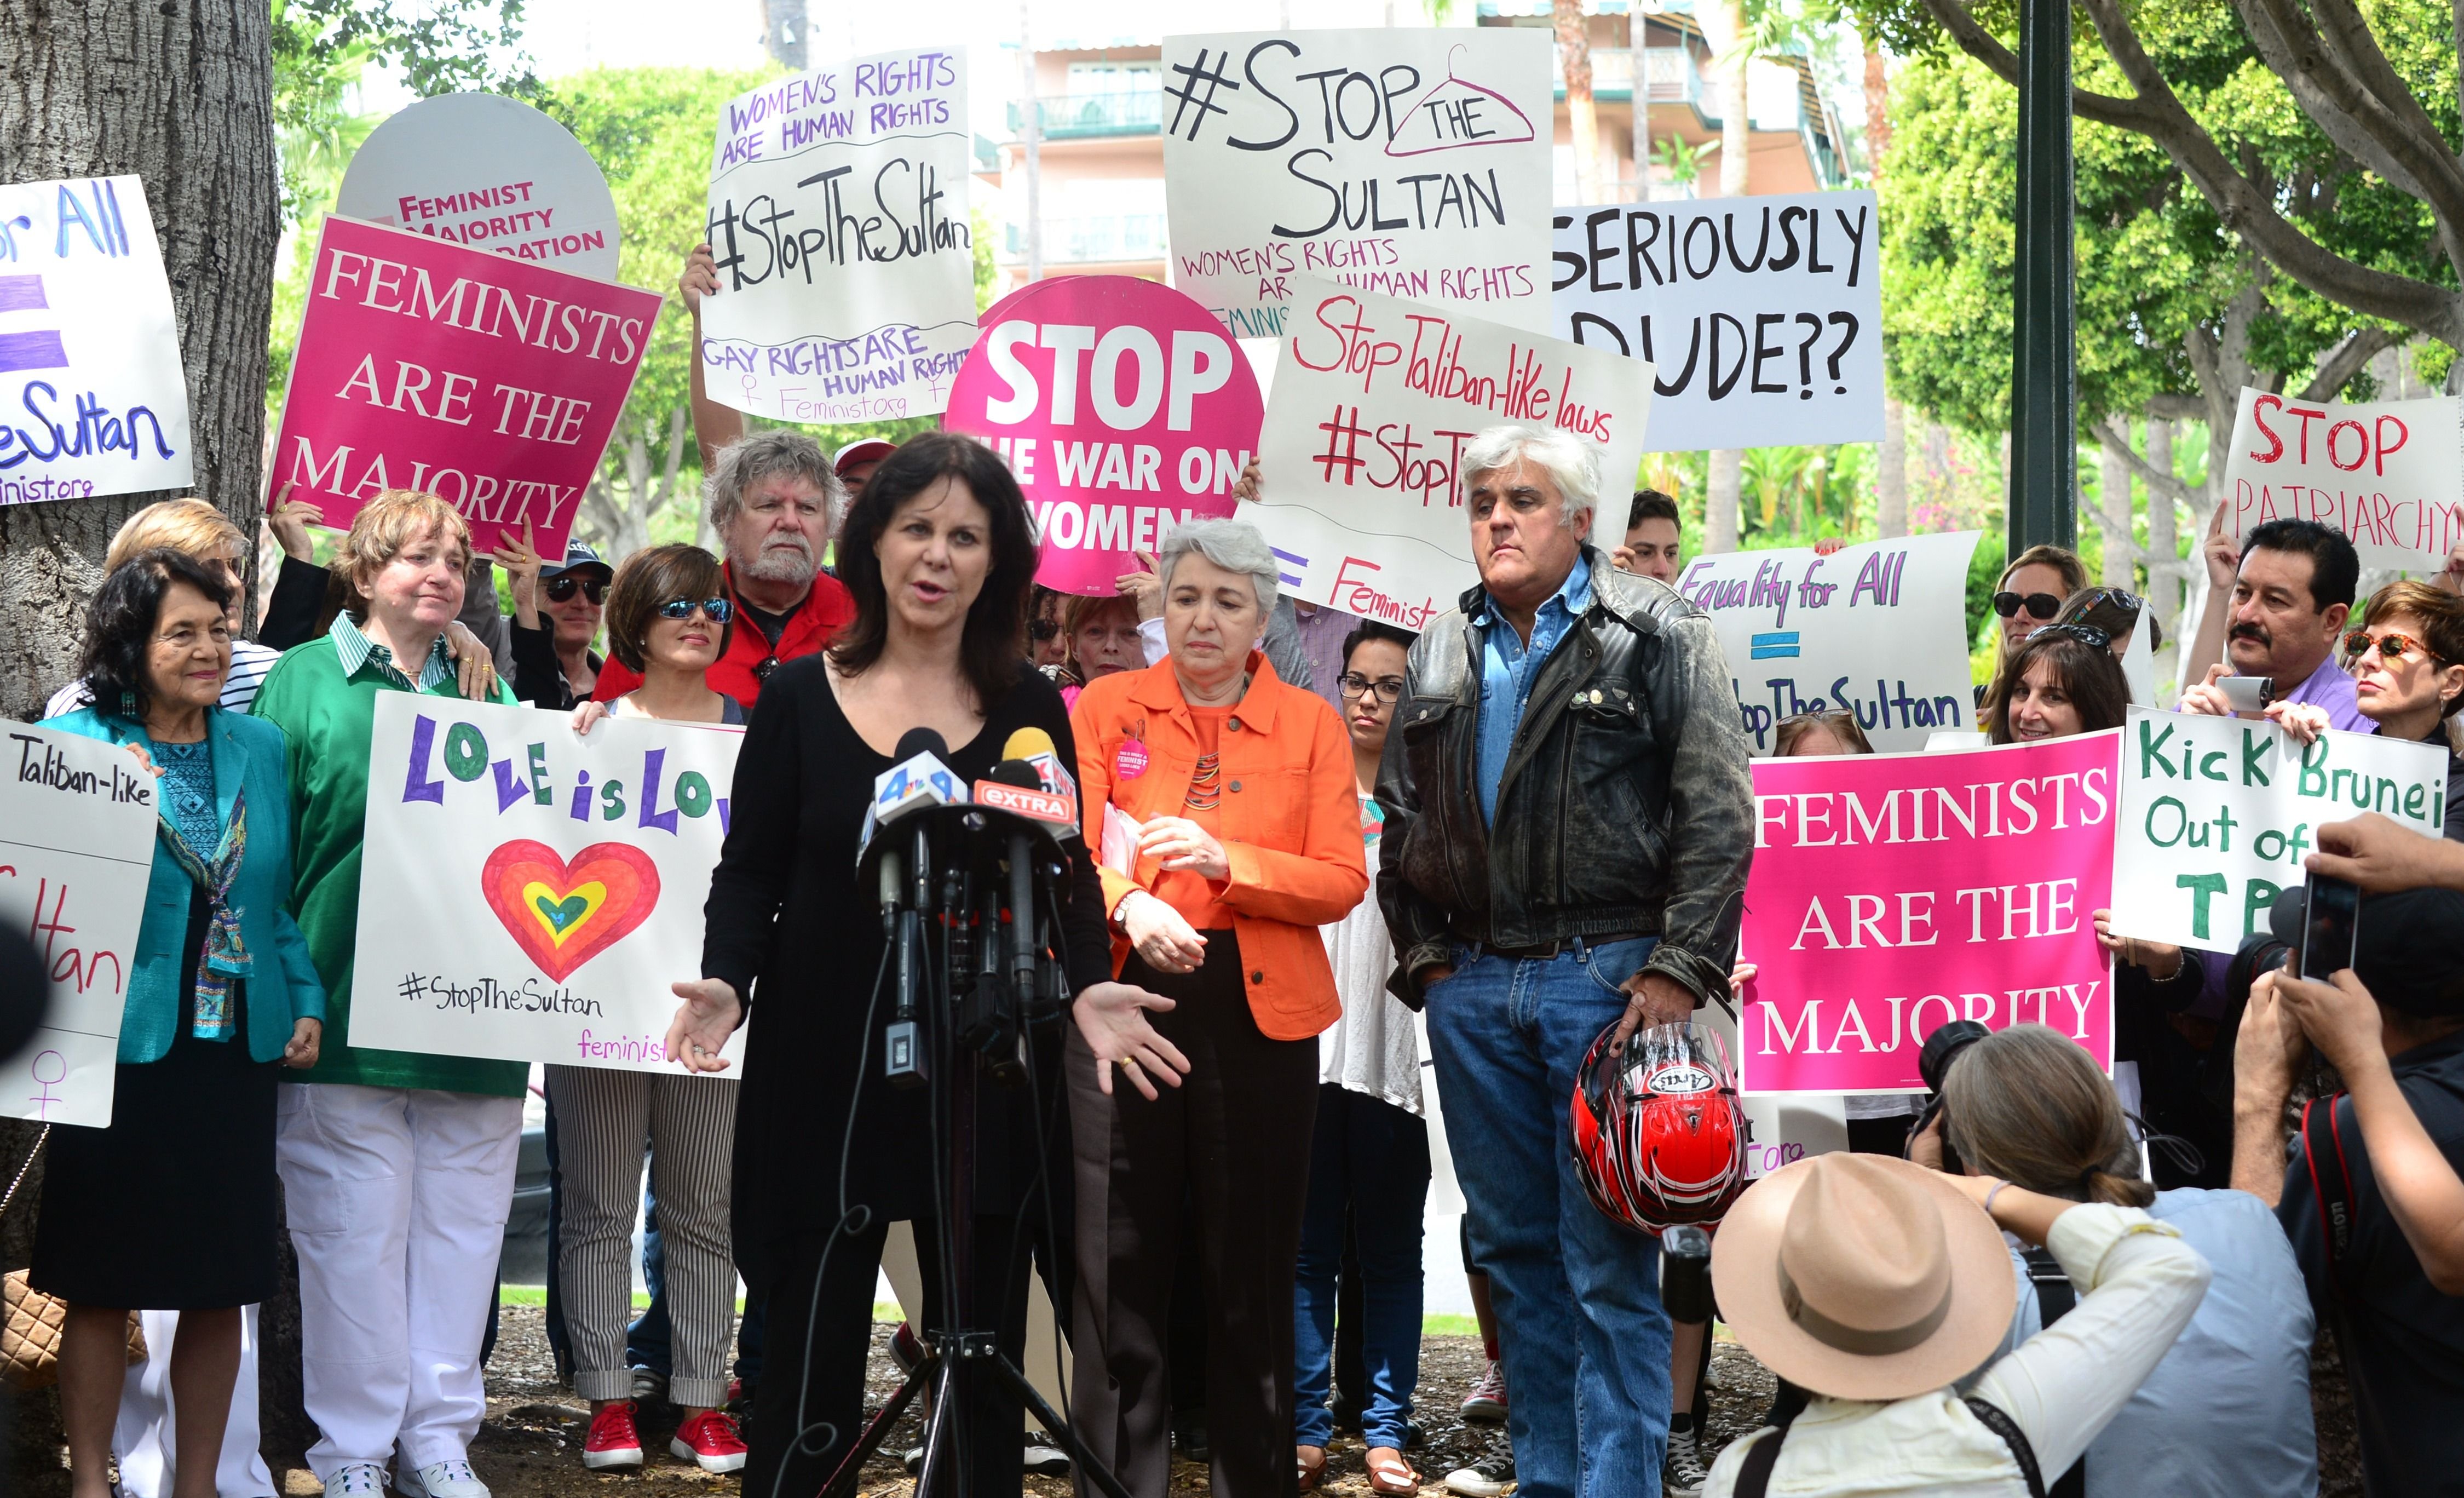 Jay Leno watches as his wife Mavis speaks to supporters of women's rights and LGBT groups at a protest across from the Beverly Hills Hotel, owned by the Sultan of Brunei, on May 5, 2014 in Beverly Hills, Calif.